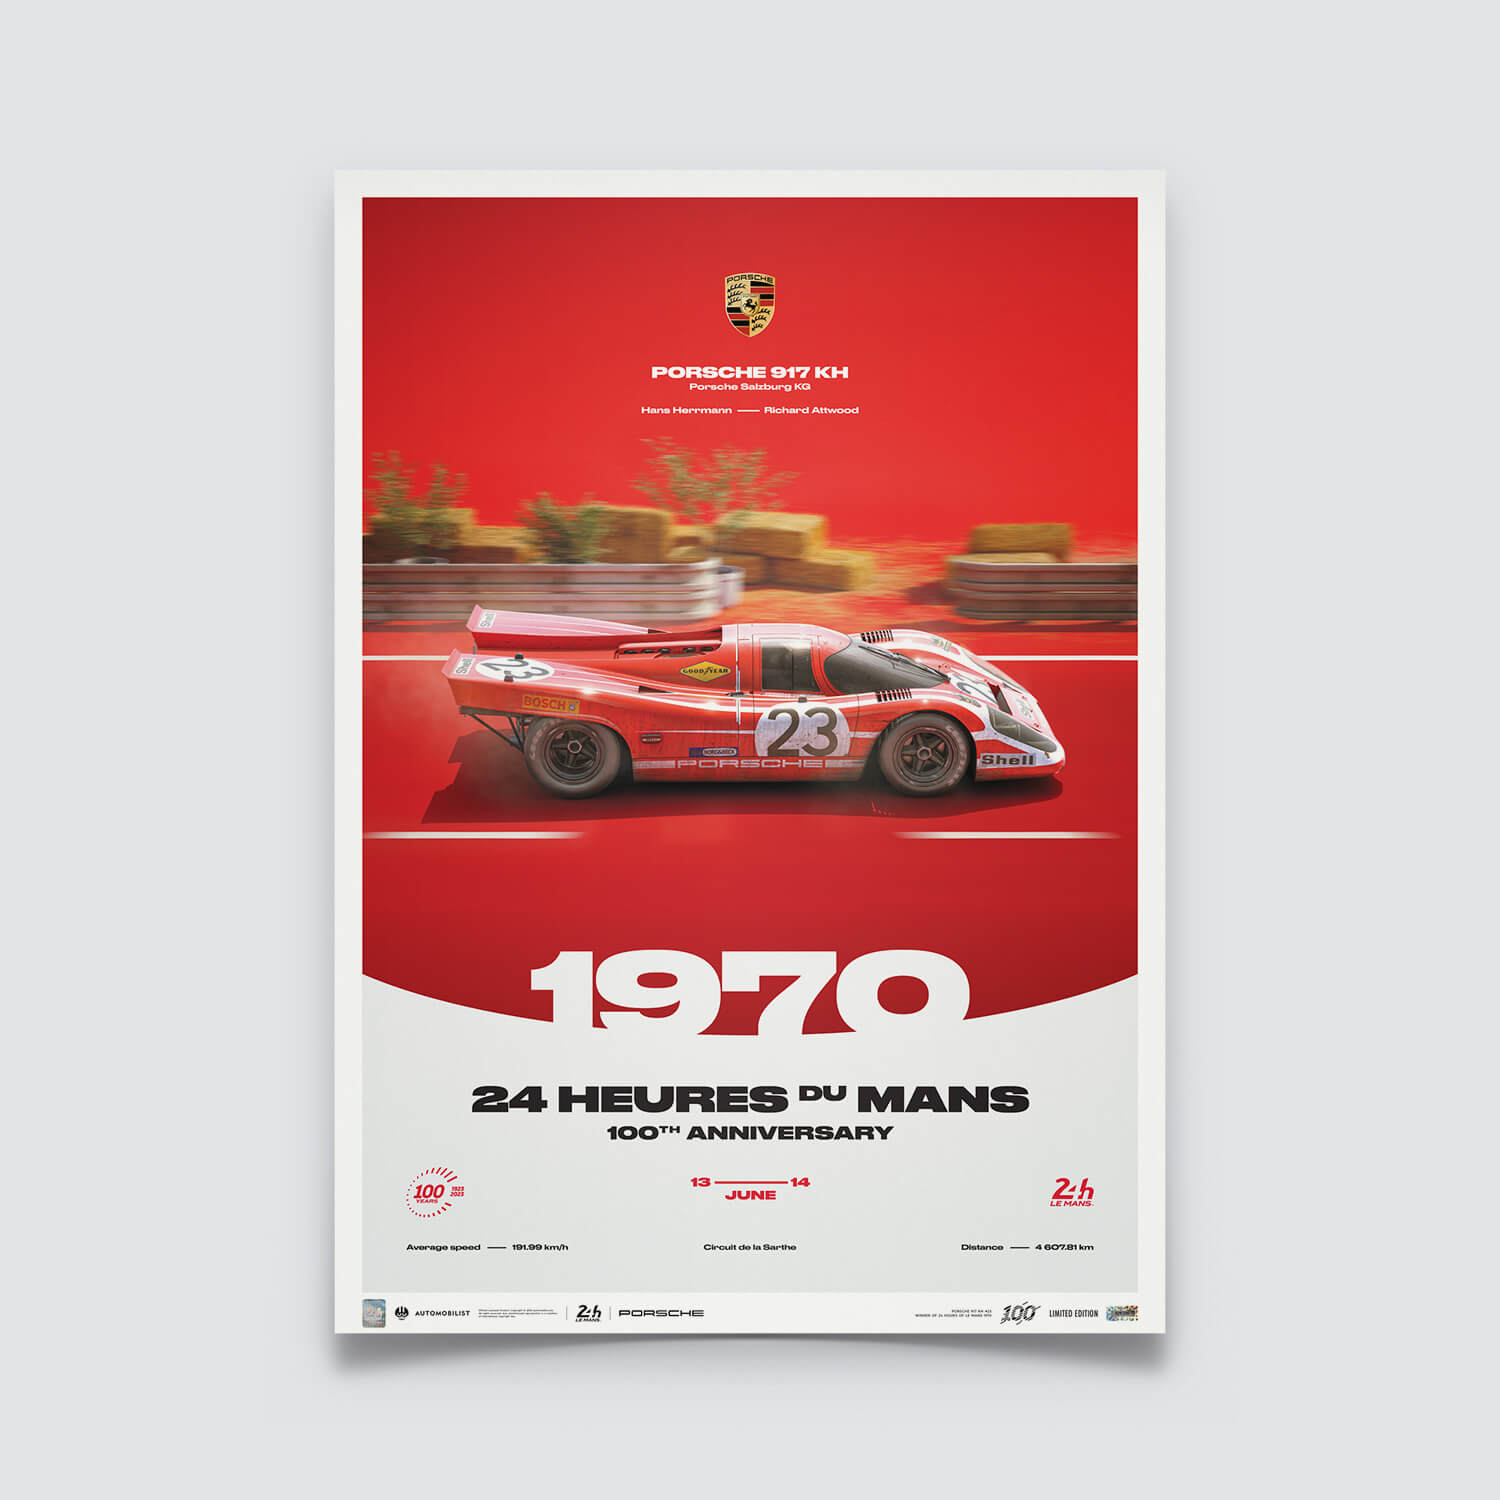 100 Years of Le Mans